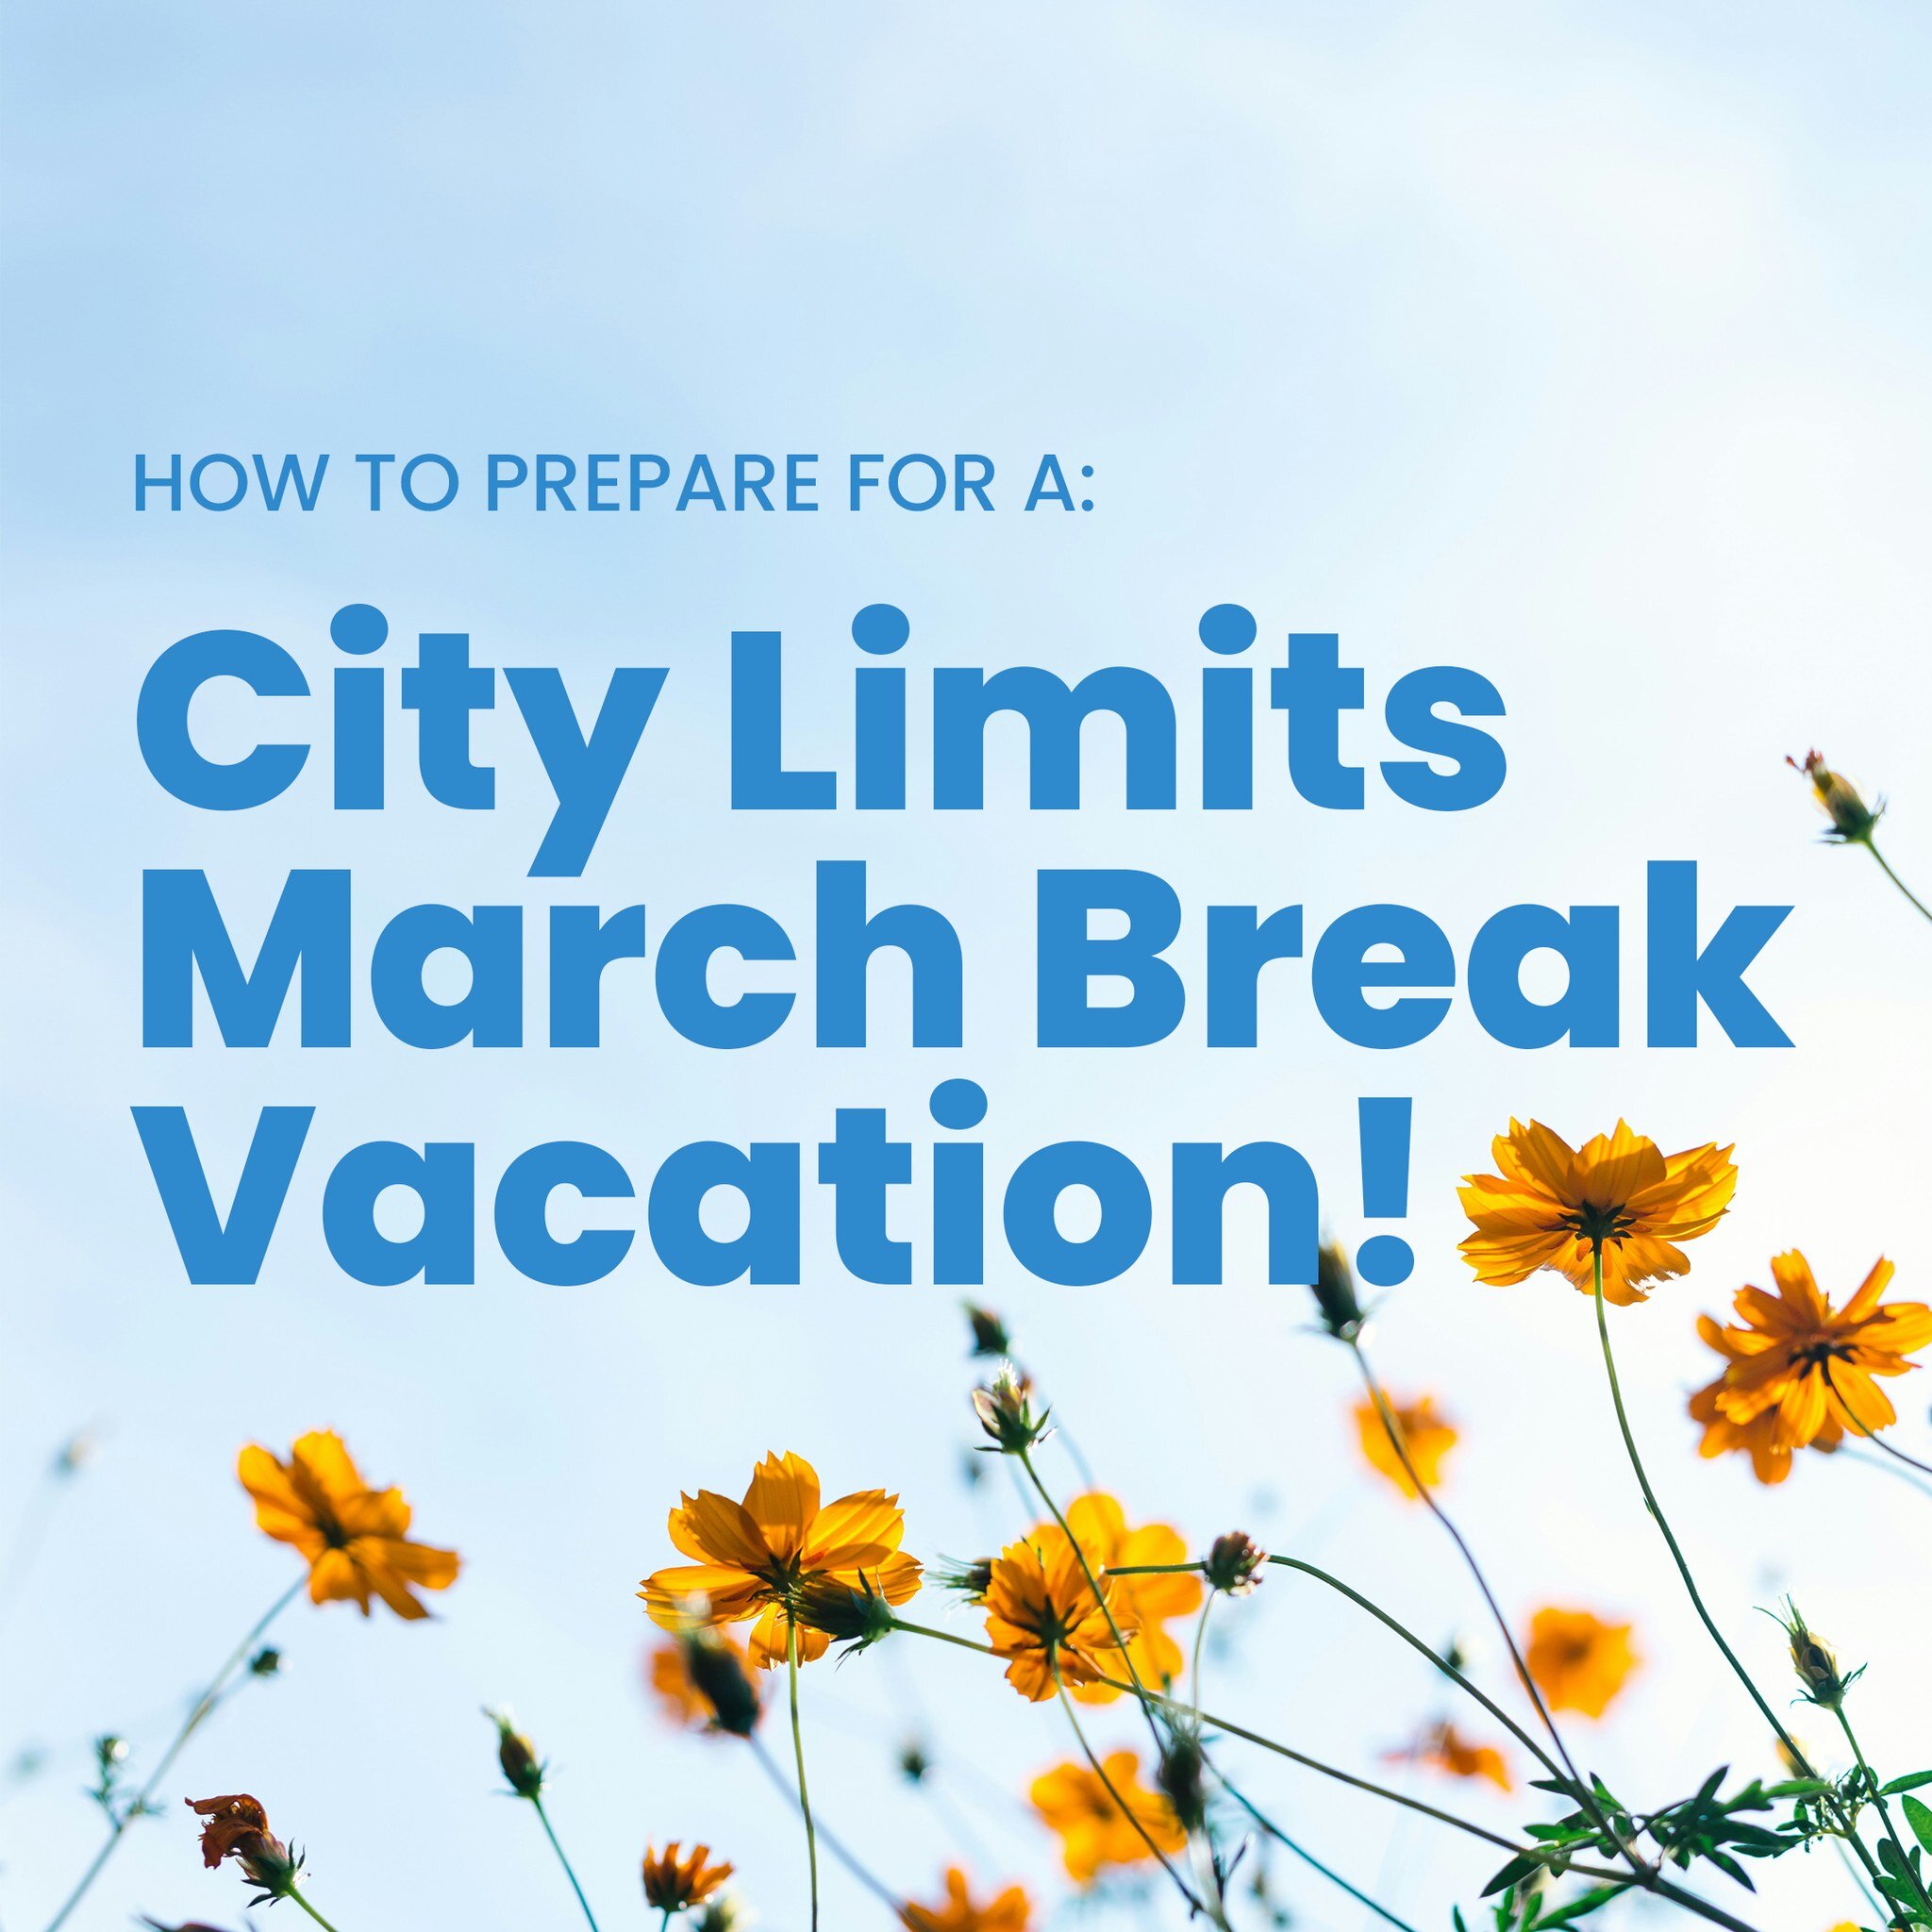 March Break Vacation starts tomorrow! Here are some tips to prepare your pup for a successful vacation 🏝.

🐾 Make sure all your pup's vaccines are up to date on their profile! We require all of our guests to be fully vaccinated at a minimum of 7 da